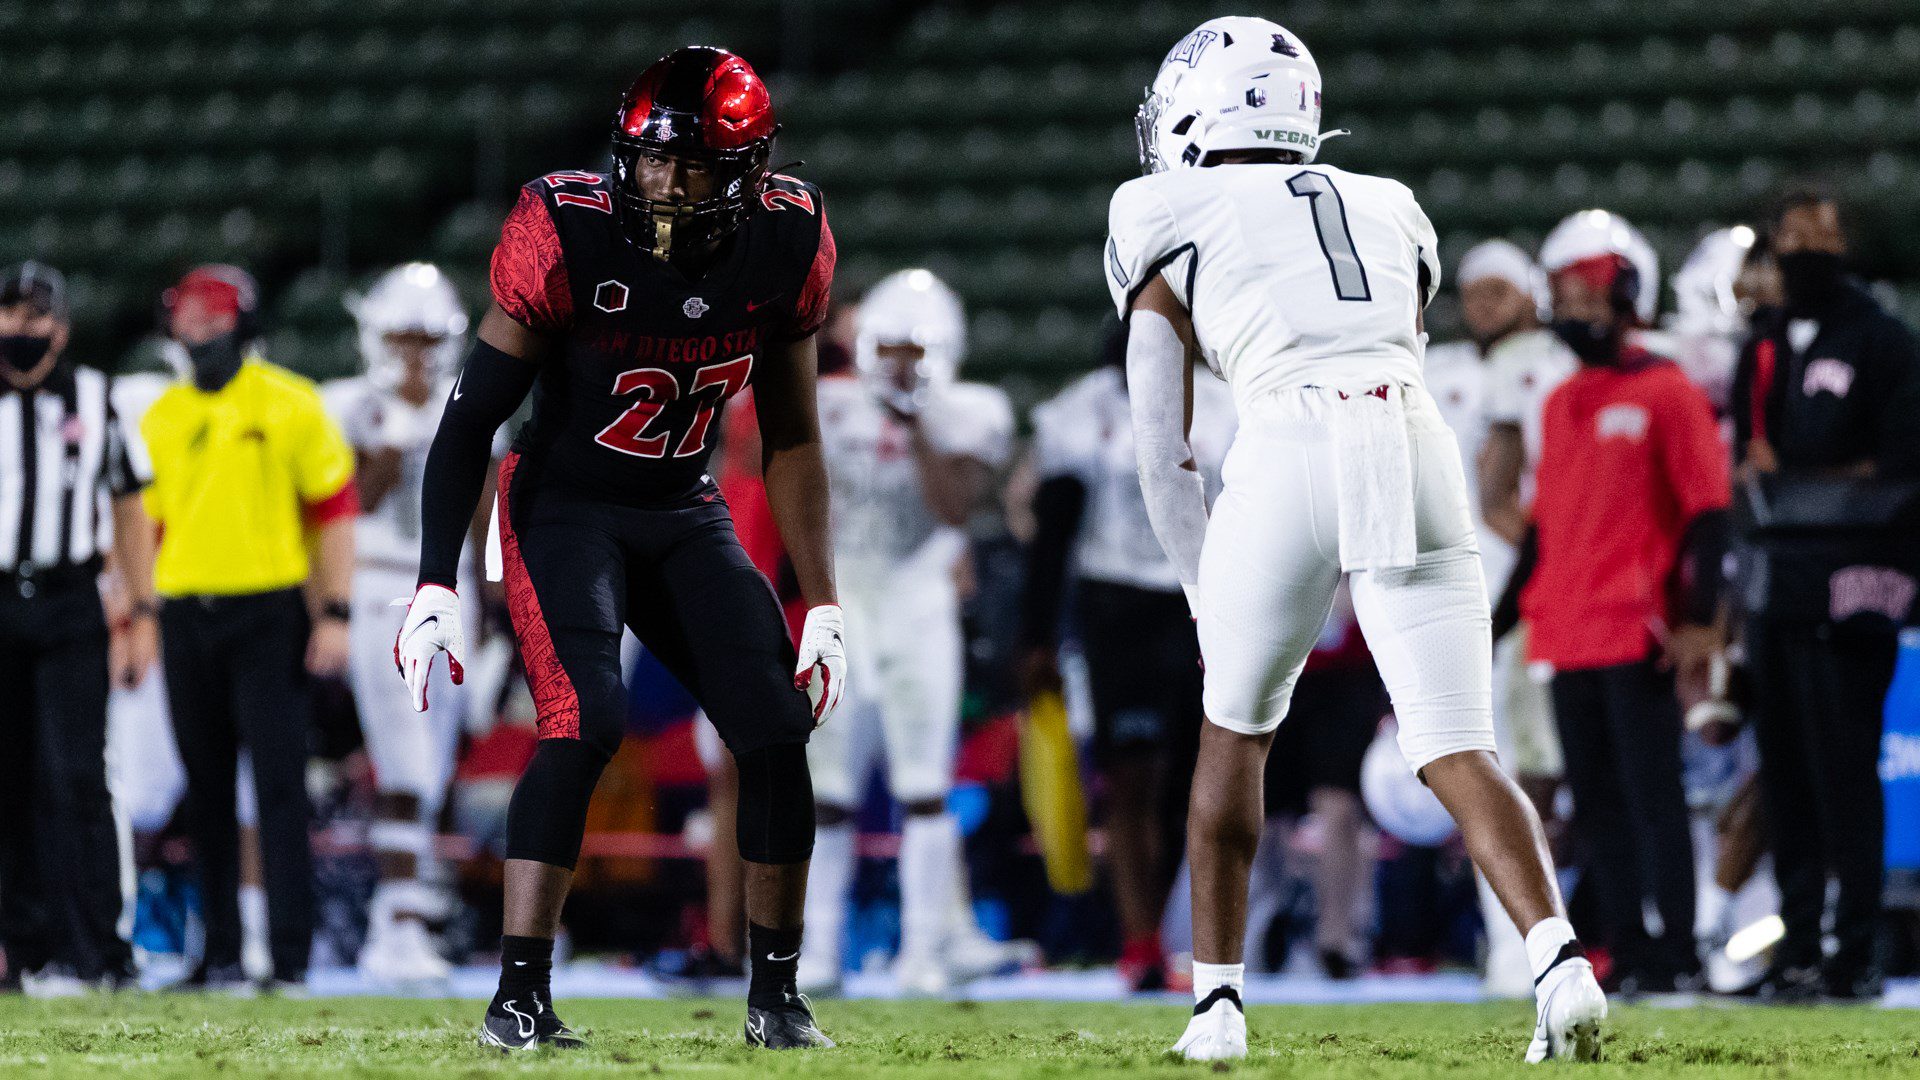 Cedarious Barfield is a veteran DB at San Diego State who offers good versatility in the secondary. Hula Bowl scout Ryan Vidales breaks down Barfield as an NFL Prospect in his report.